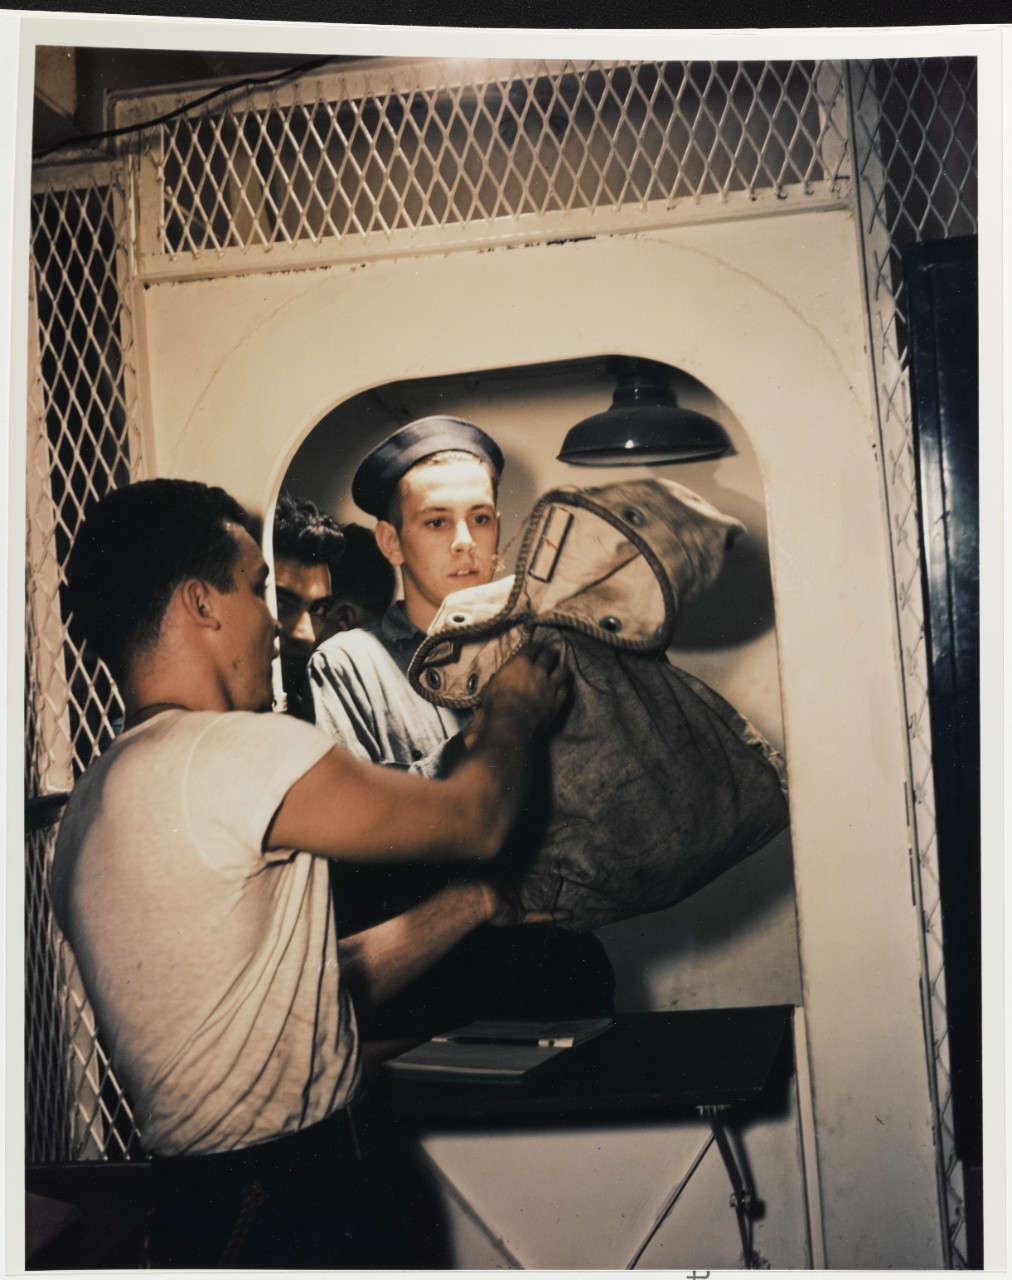 Mail Call. PRTR3c Val Gerolstein receives a sack of mail, on board a U.S. Navy ship, 1945